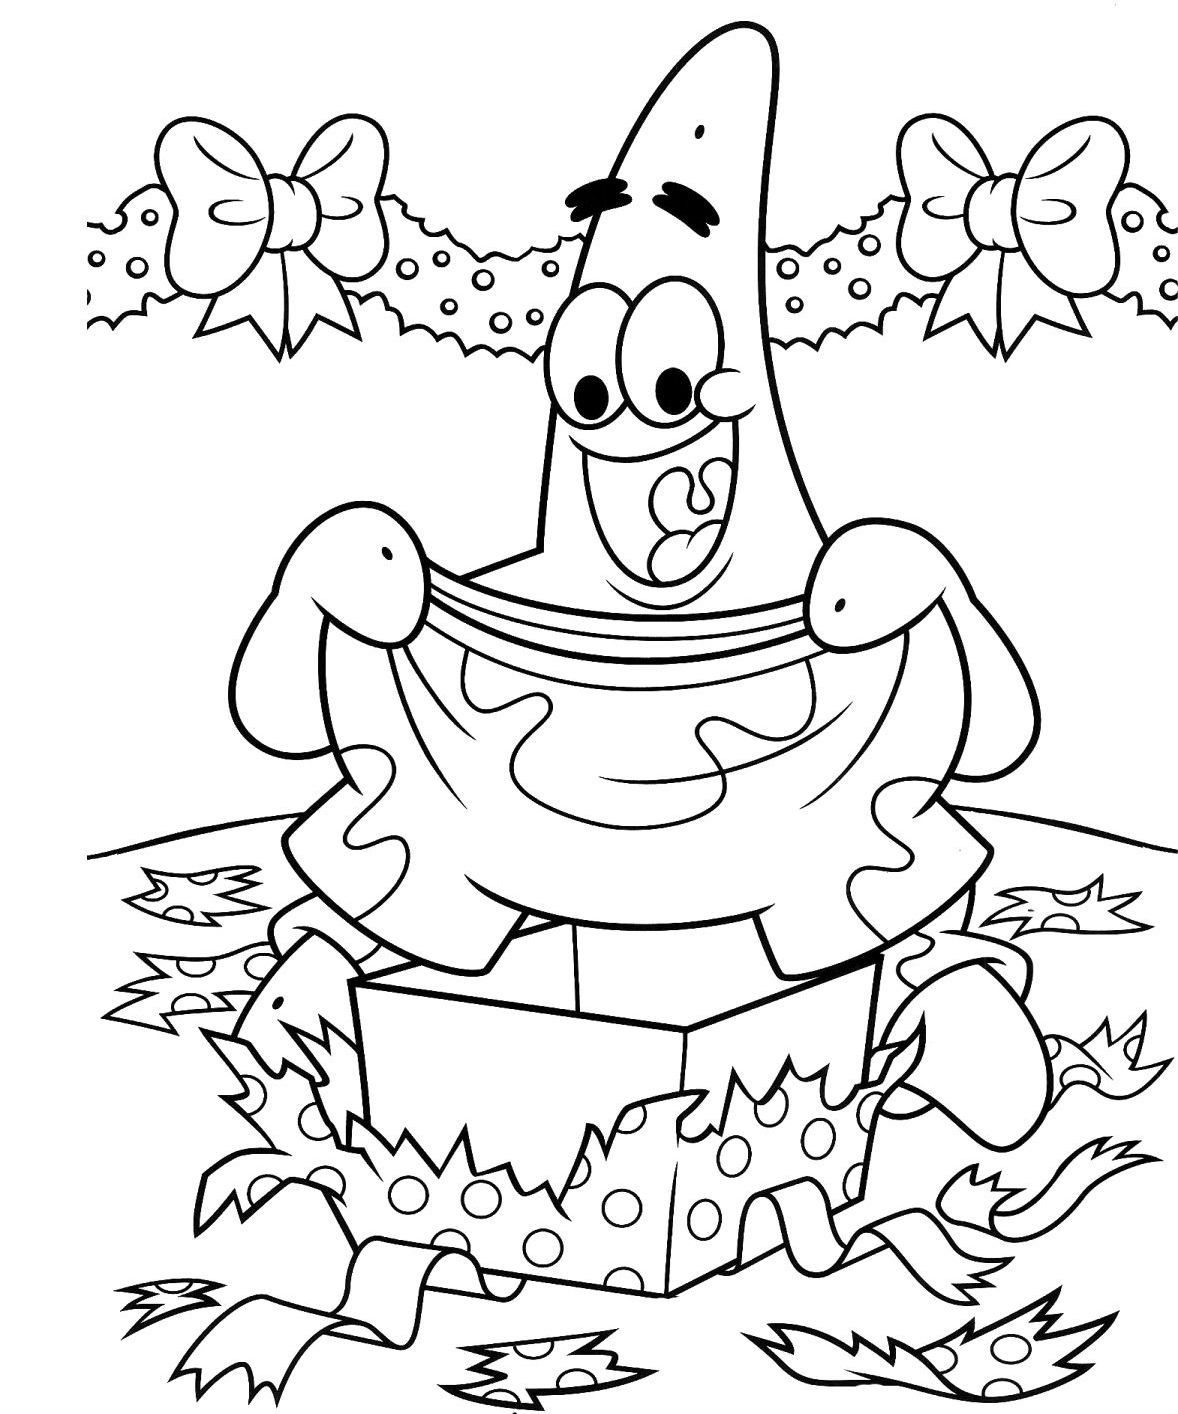 Spongebob Christmas Colouring Pages - Coloring Pages for Kids and ...